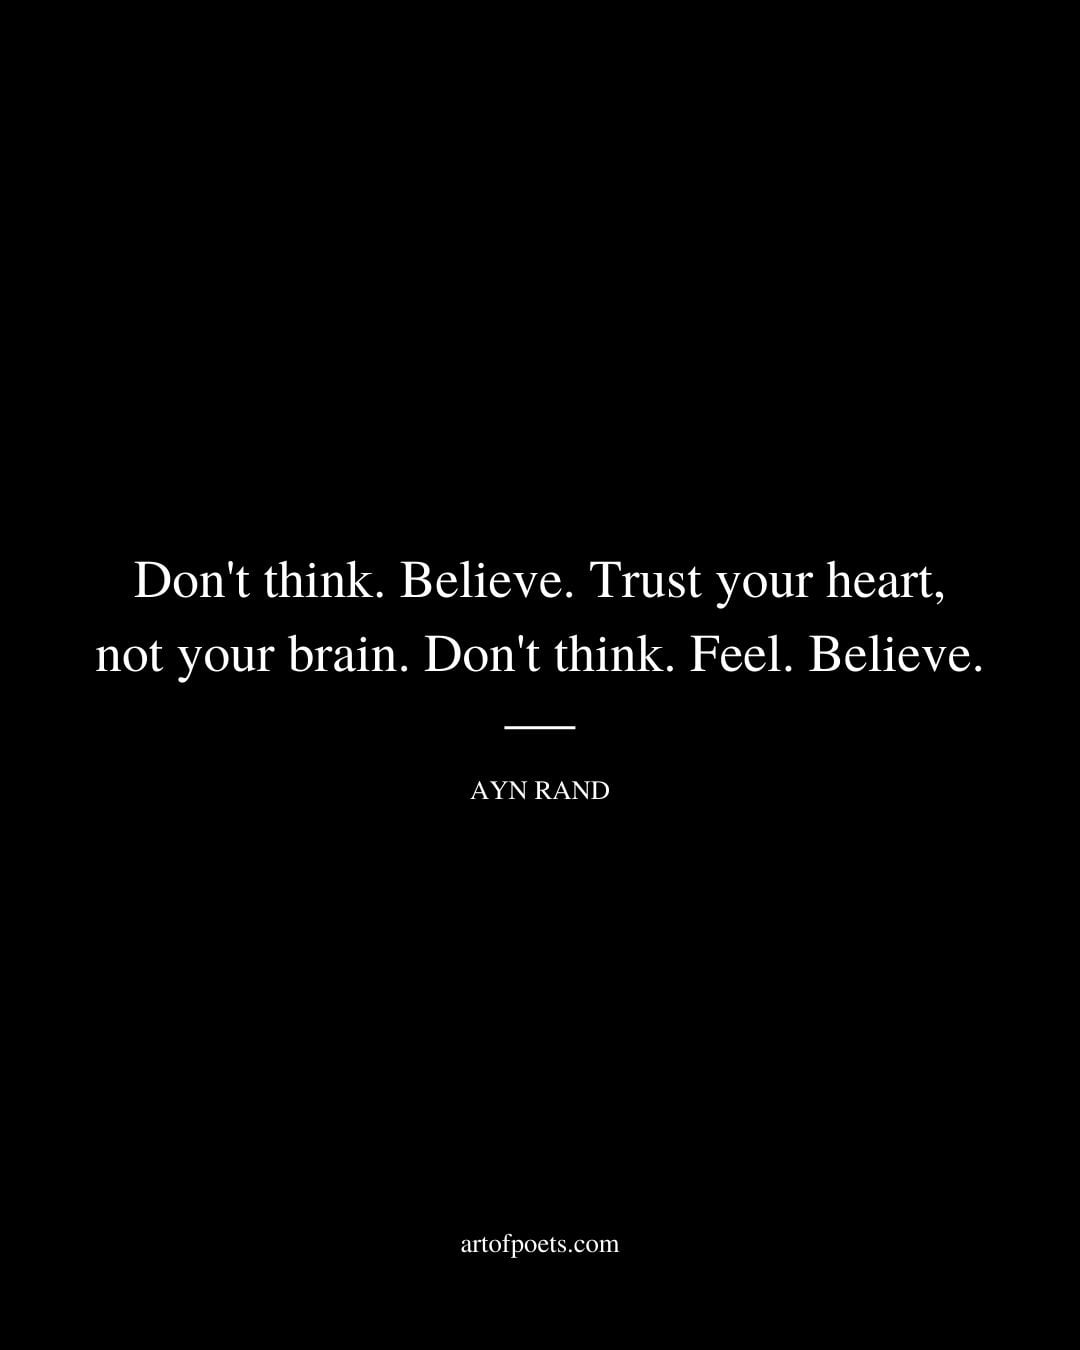 Dont think. Believe. Trust your heart not your brain. Dont think. Feel. Believe